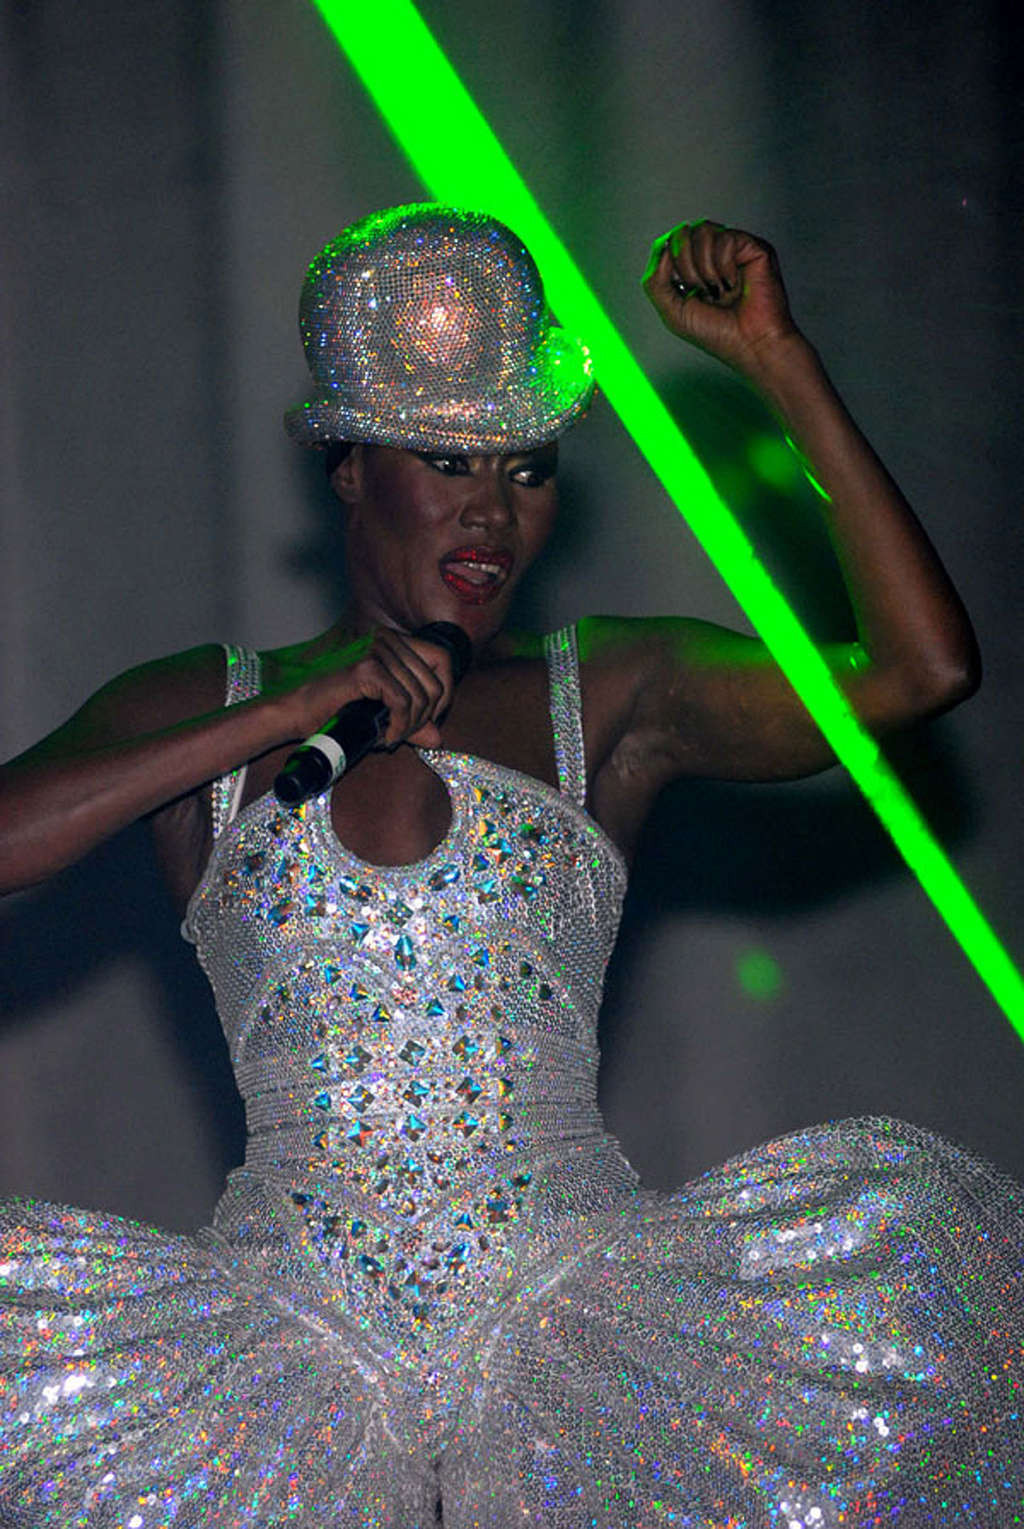 Grace Jones tits slip and upskirt on stage paparazzi pictures #75359728